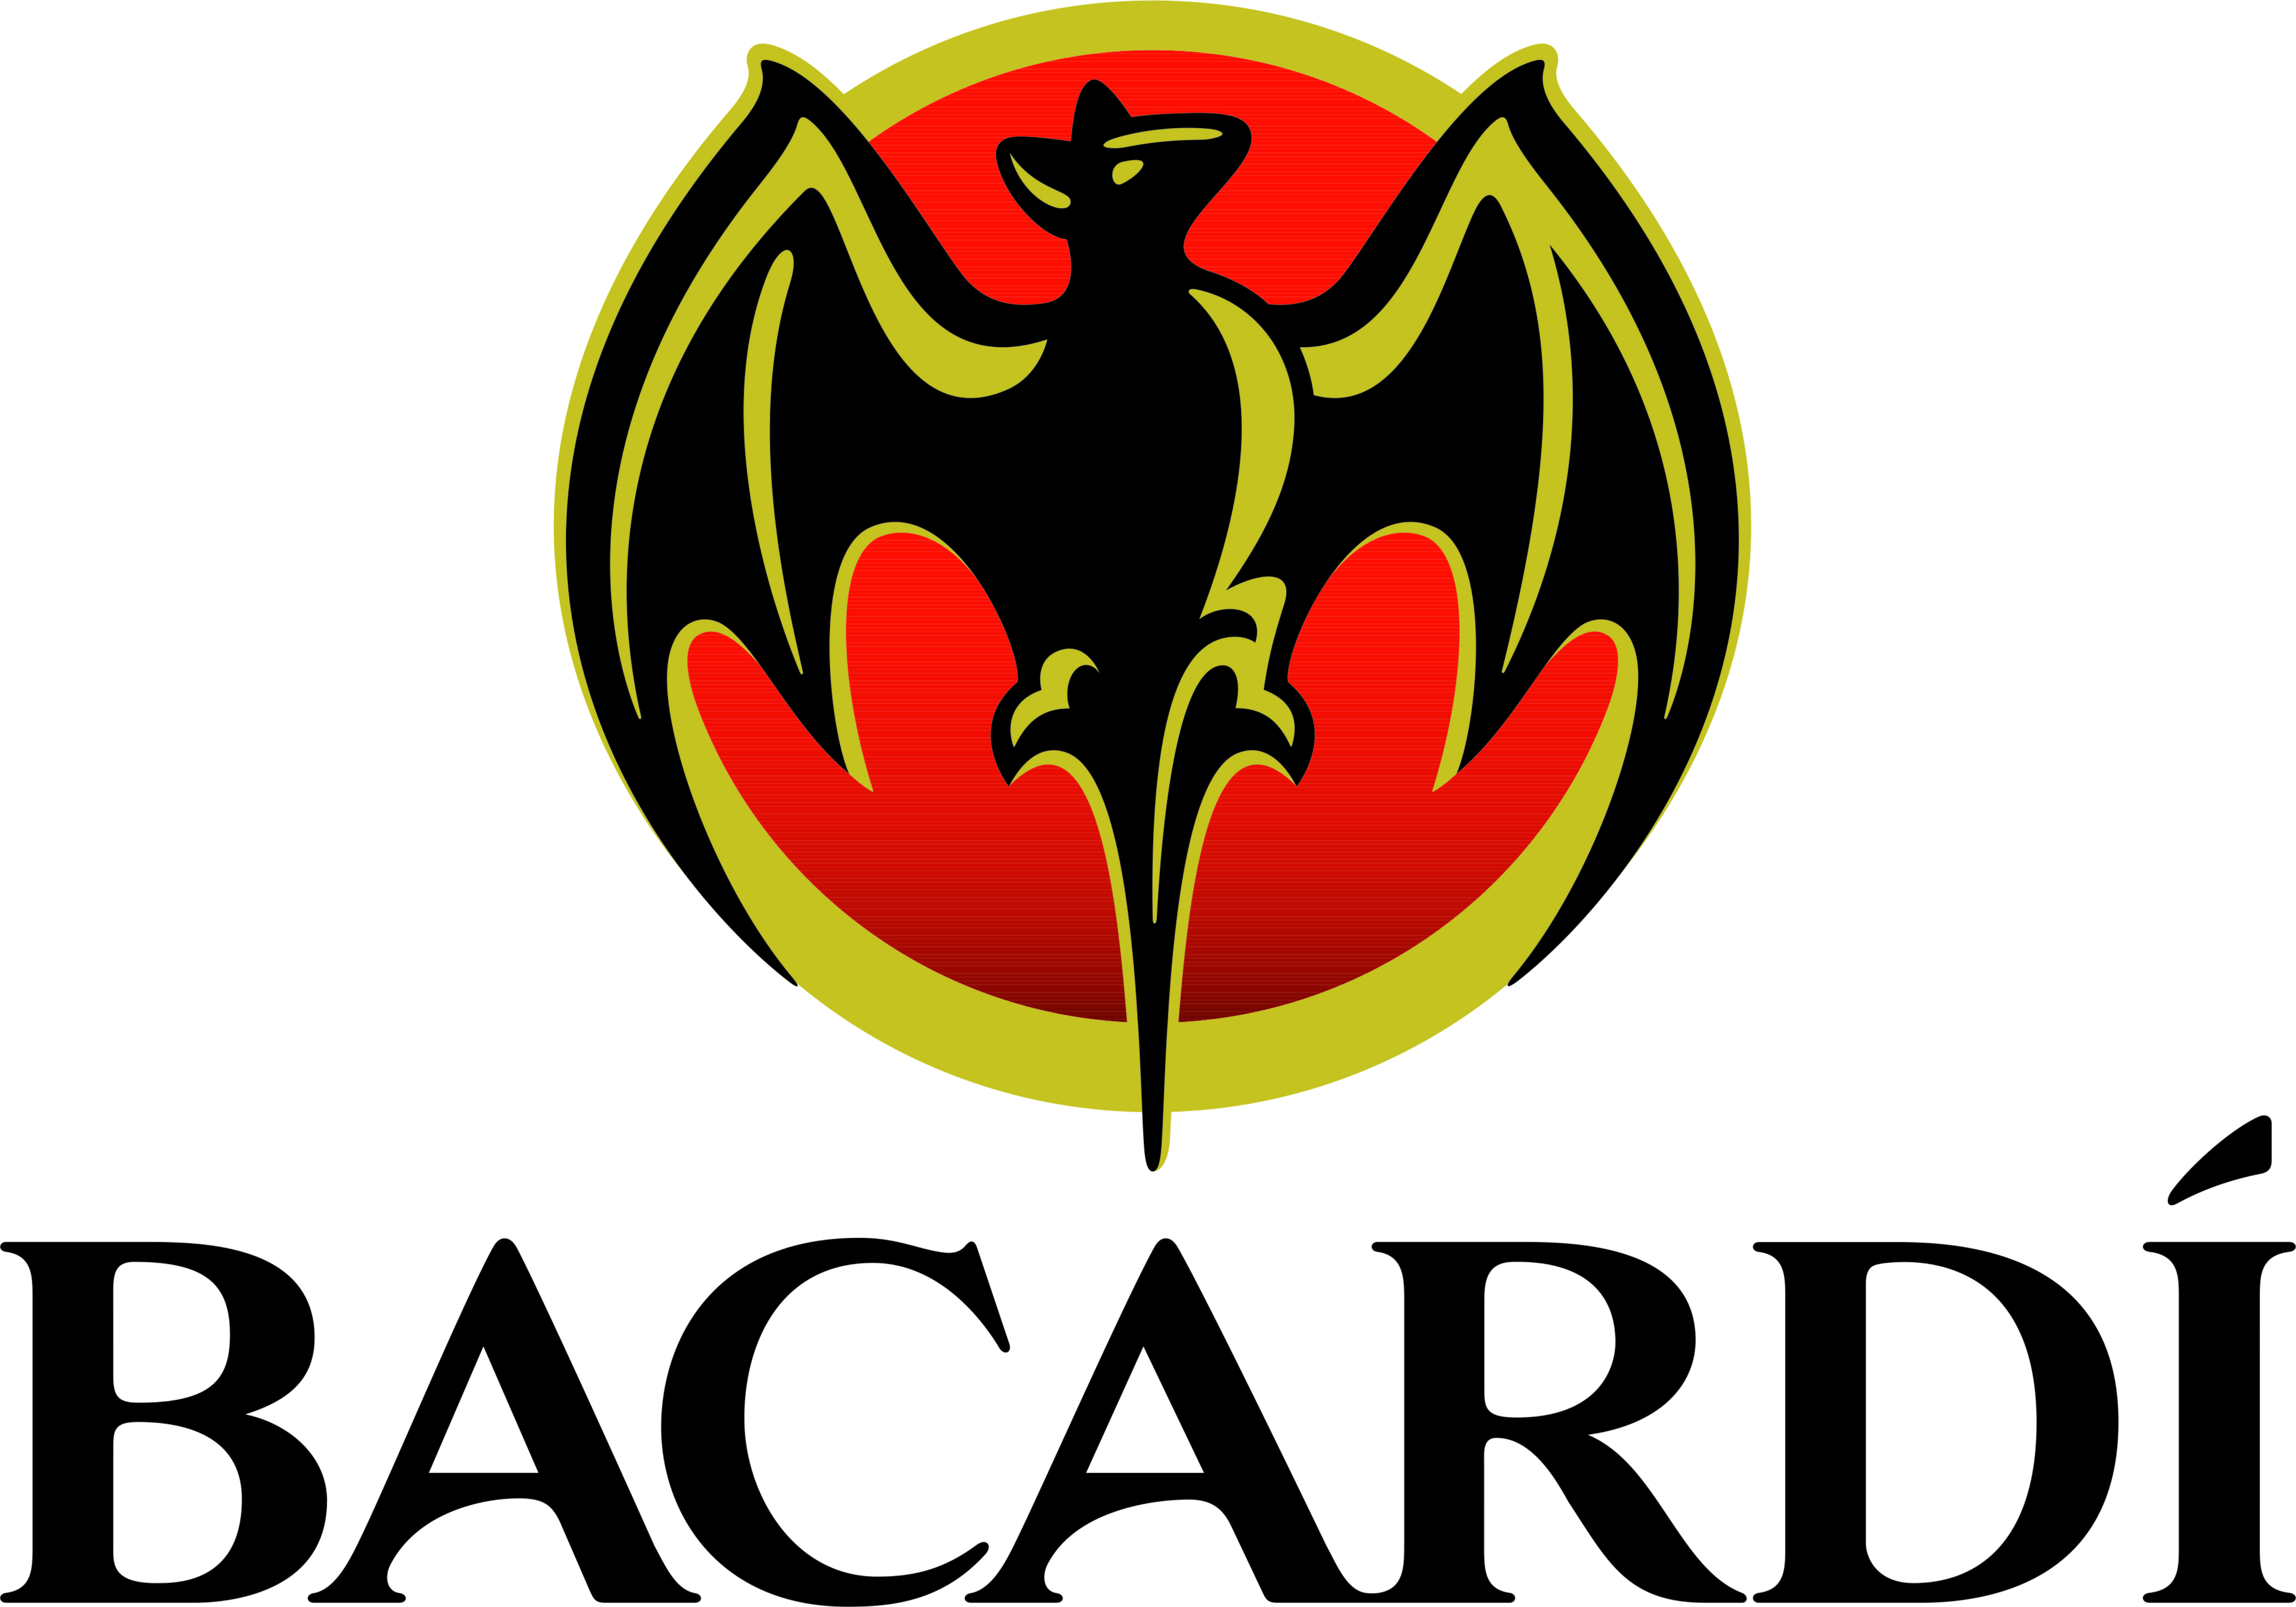 Products Bacardi HD Wallpaper | Background Image